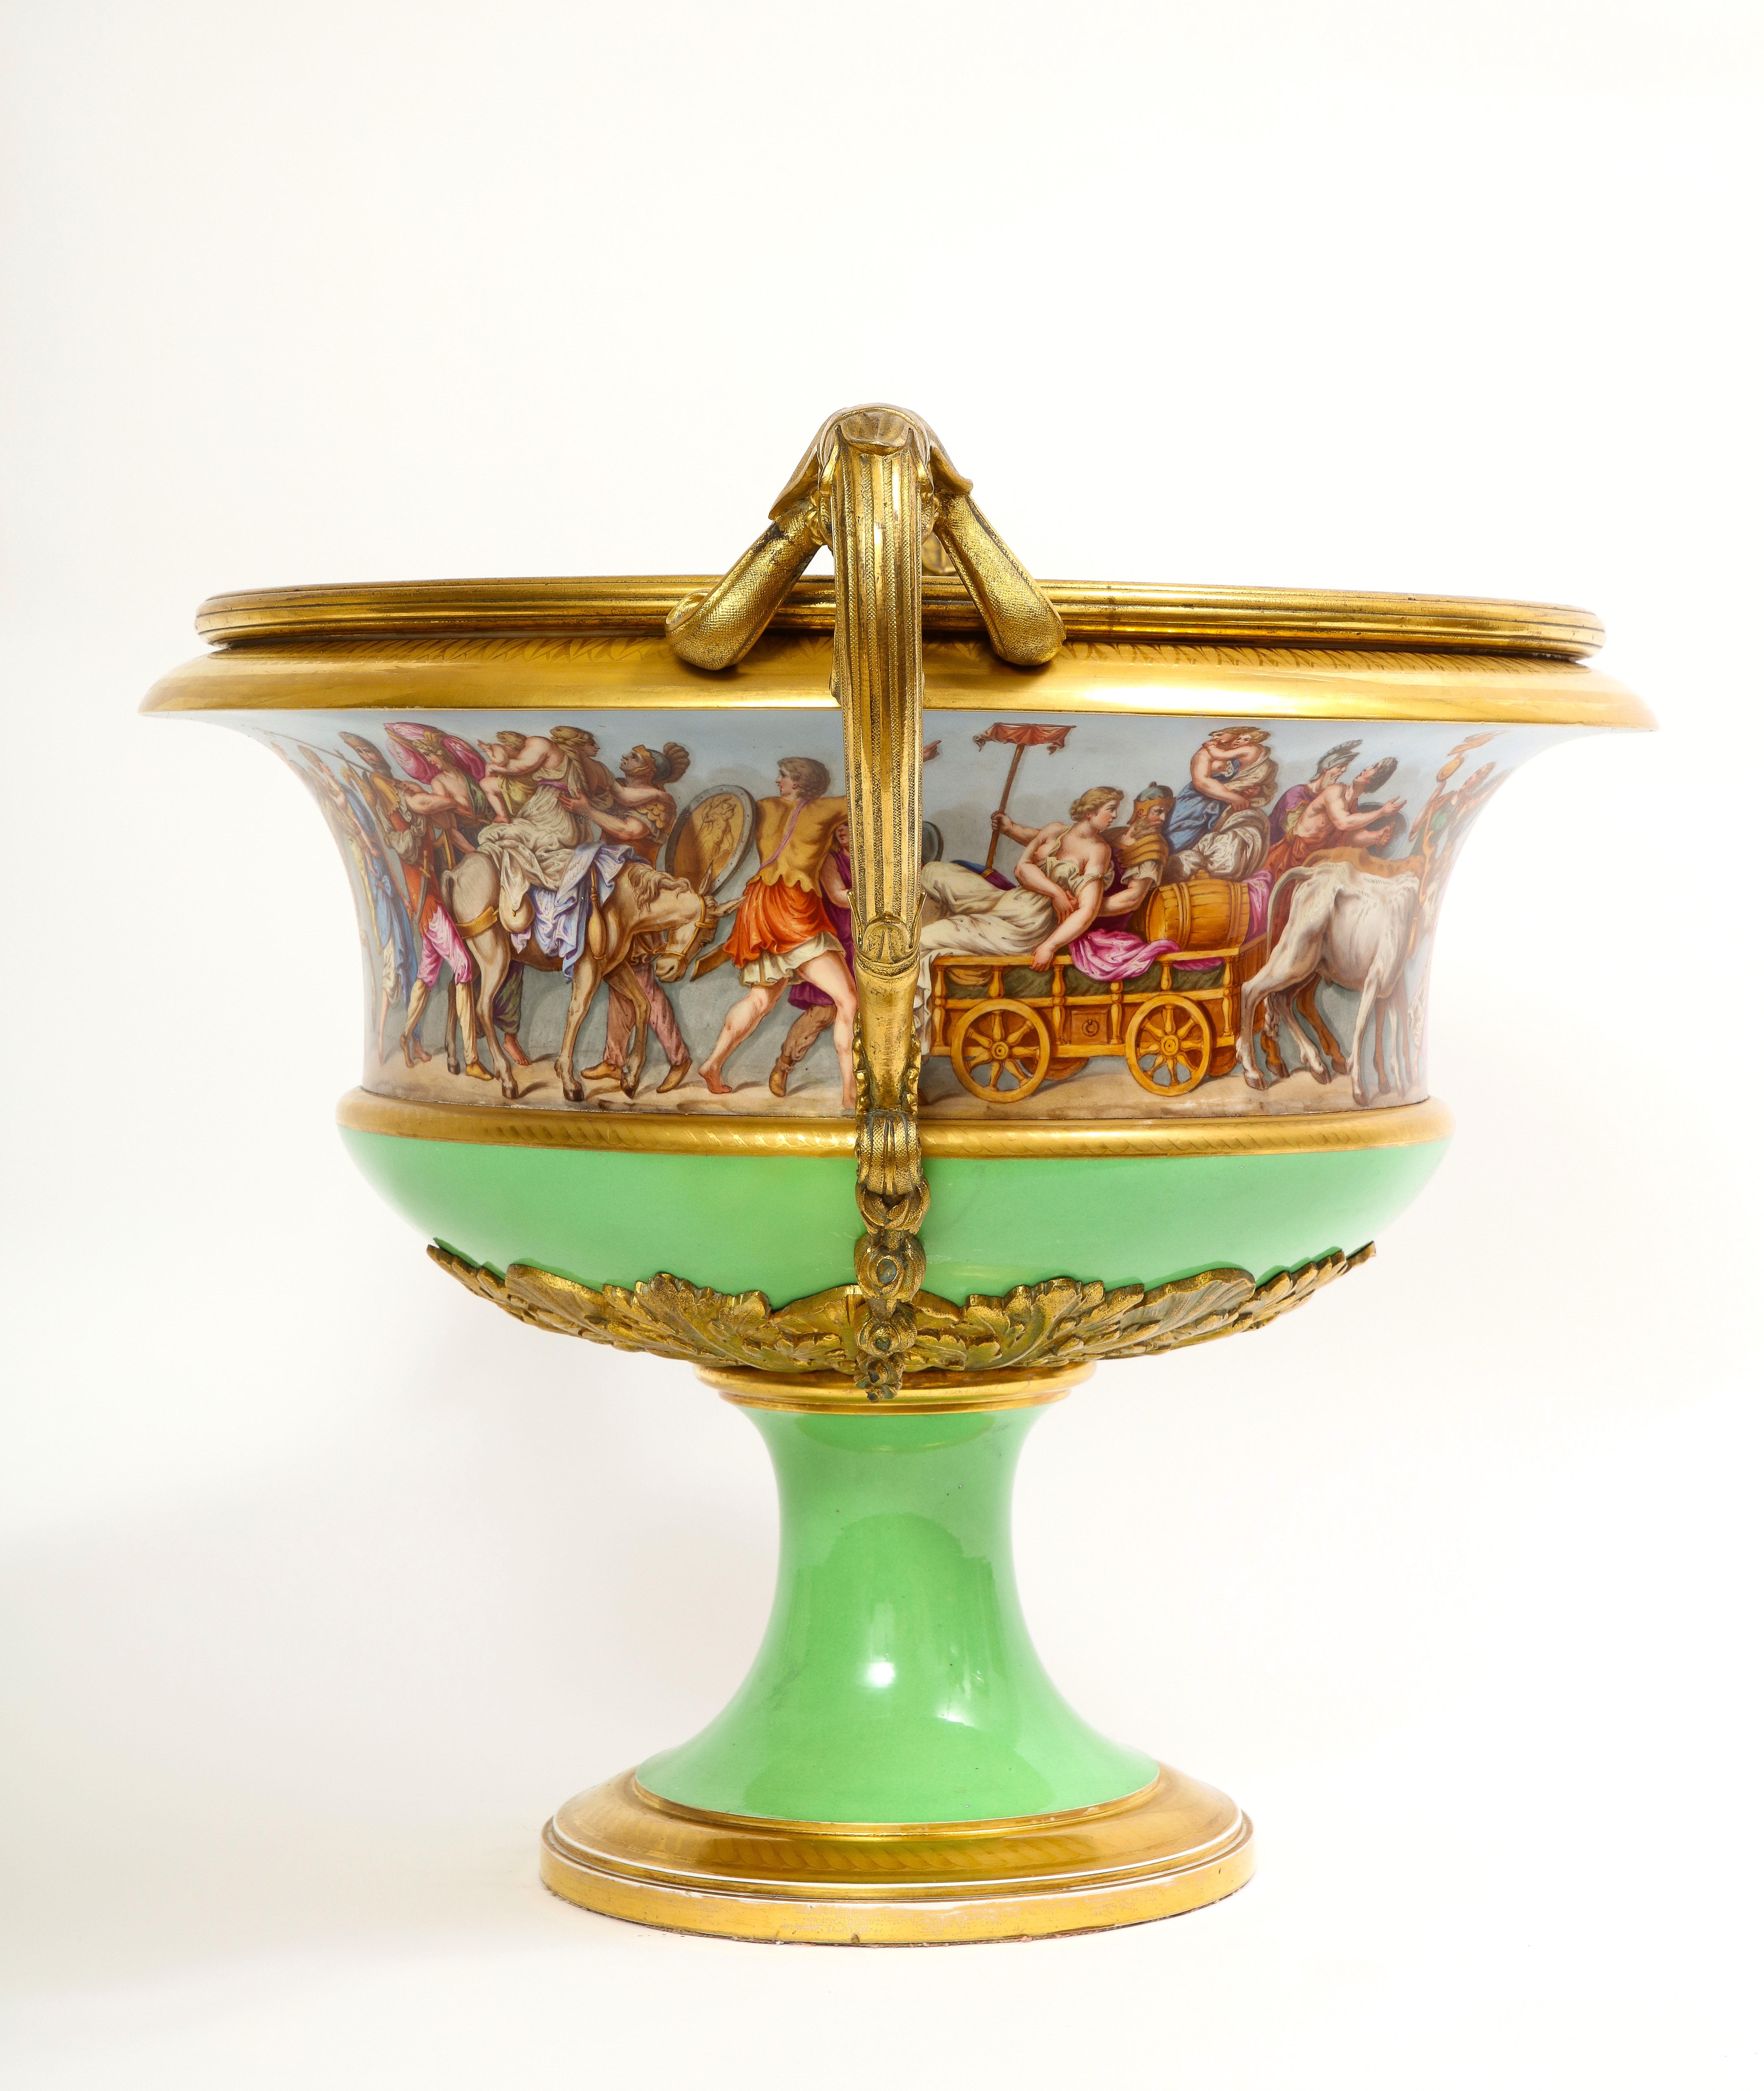 Monumental Sevres Porcelain Ormolu-Mounted 2-Handle Campana Form Centerpiece In Good Condition For Sale In New York, NY